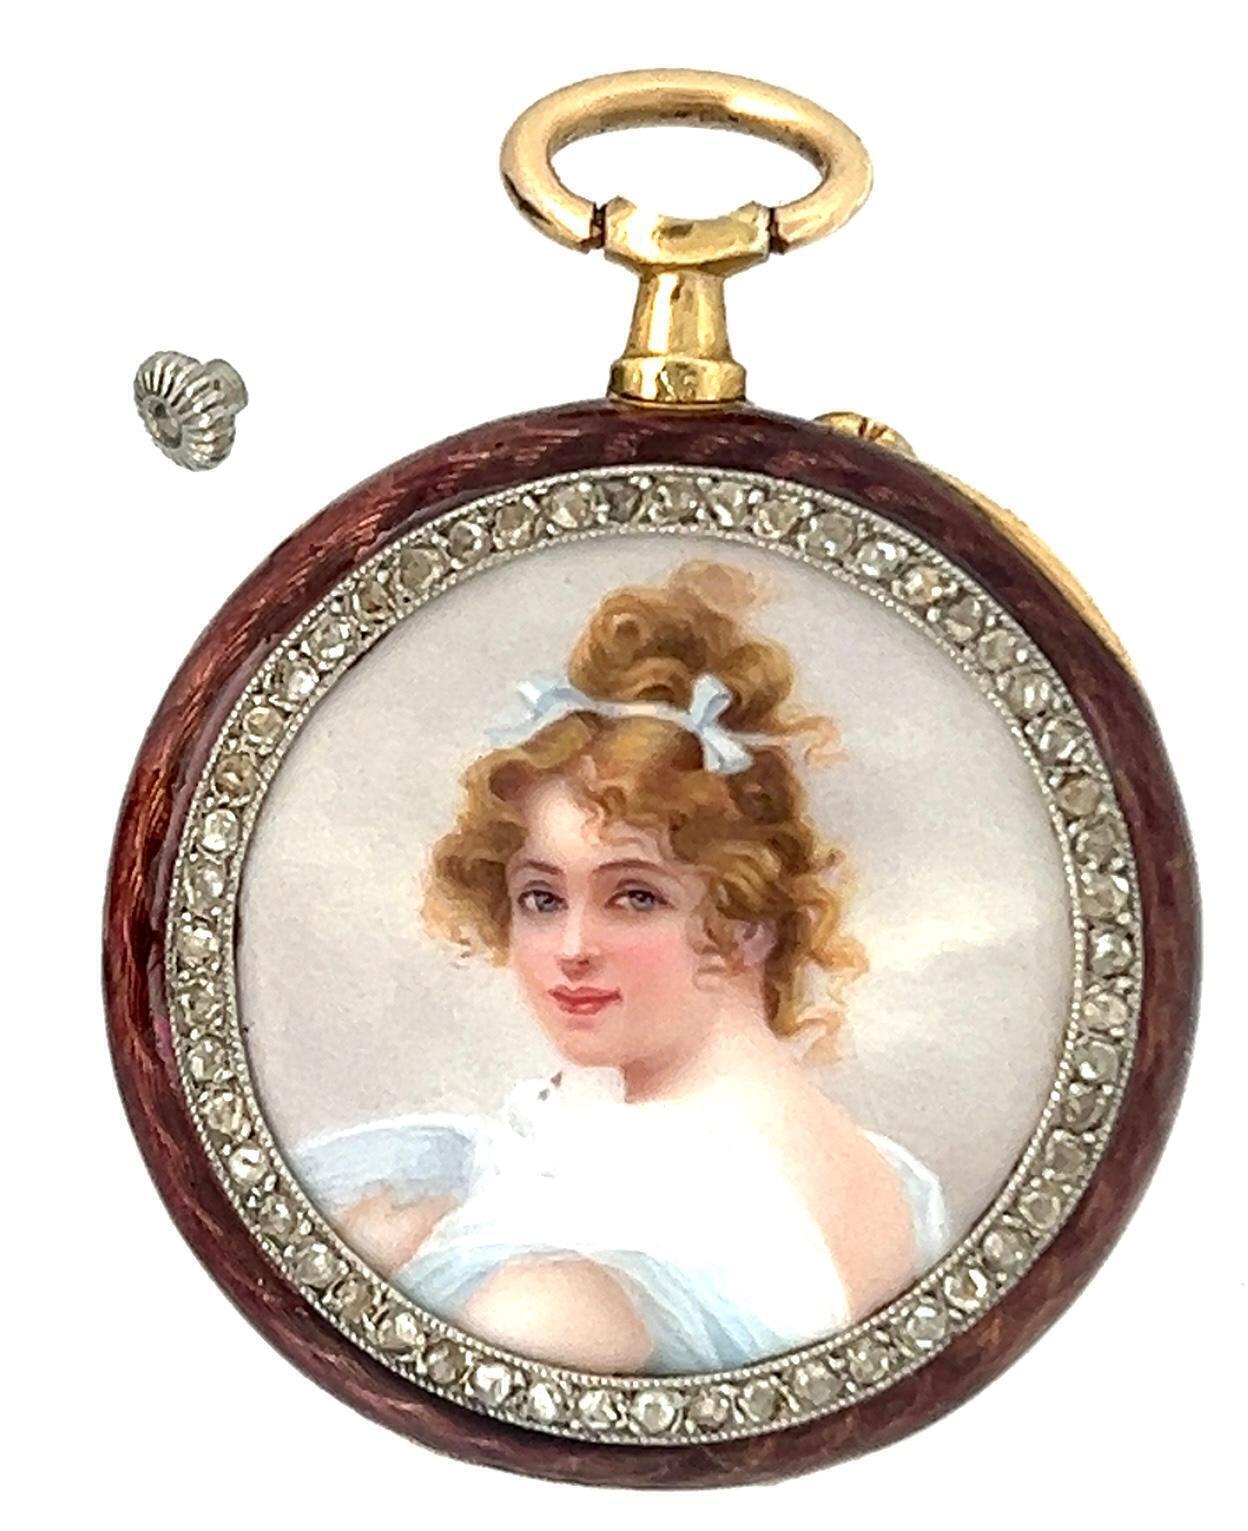 GOLAY FILS AND STAHL MINIATURE GOLD ENAMEL AND DIAMOND PENDANT WATCH, CIRCA 1905